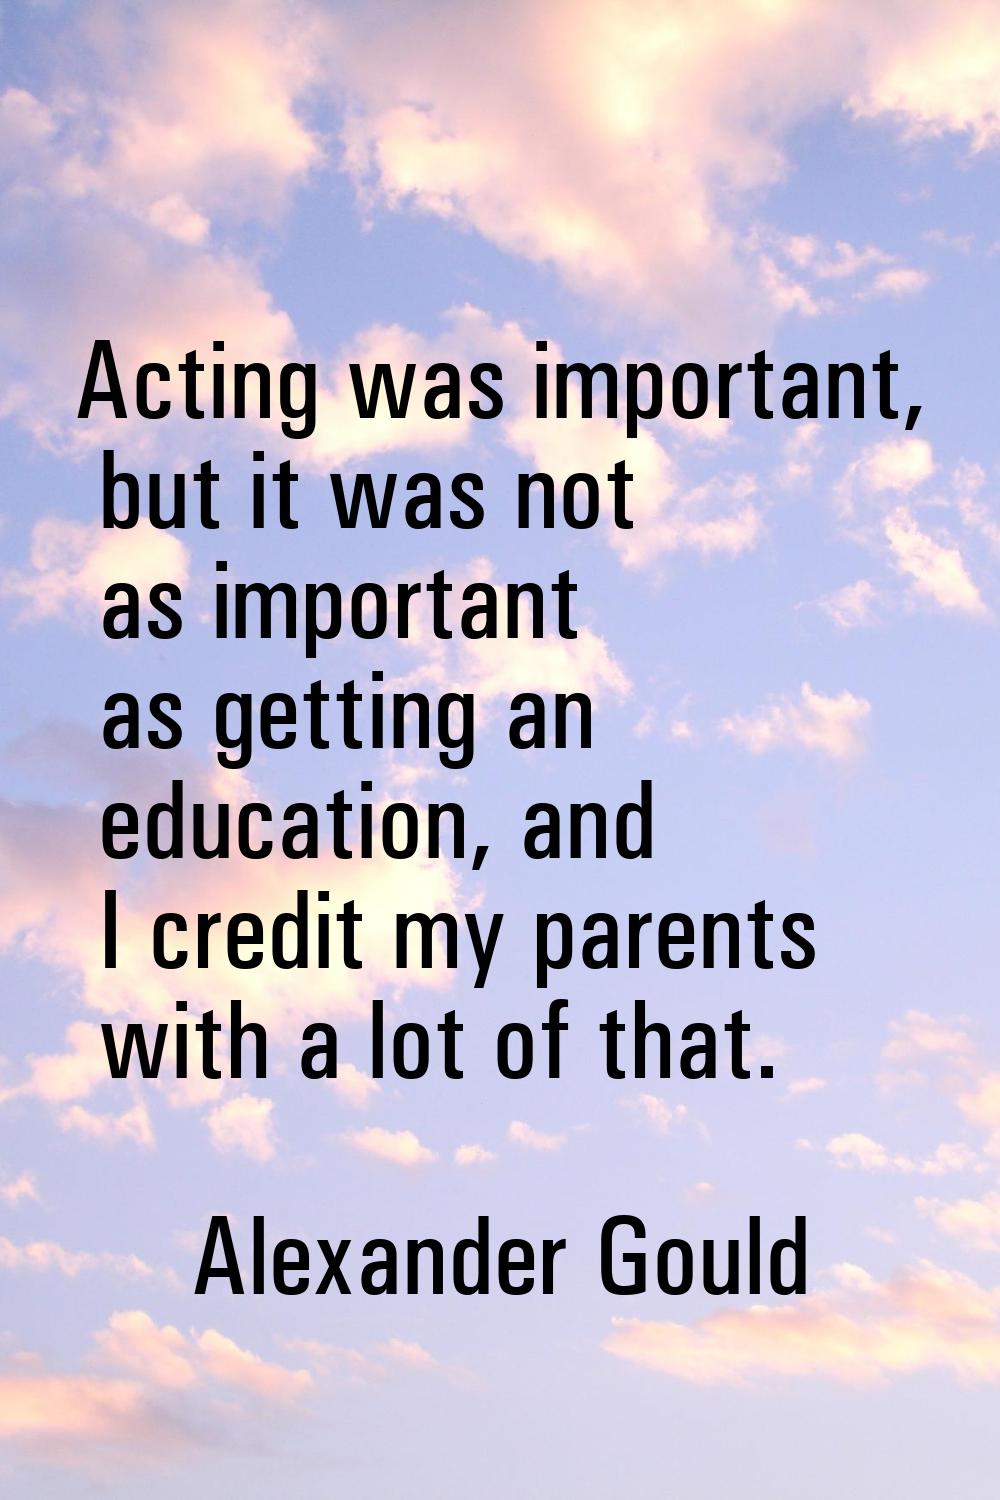 Acting was important, but it was not as important as getting an education, and I credit my parents 